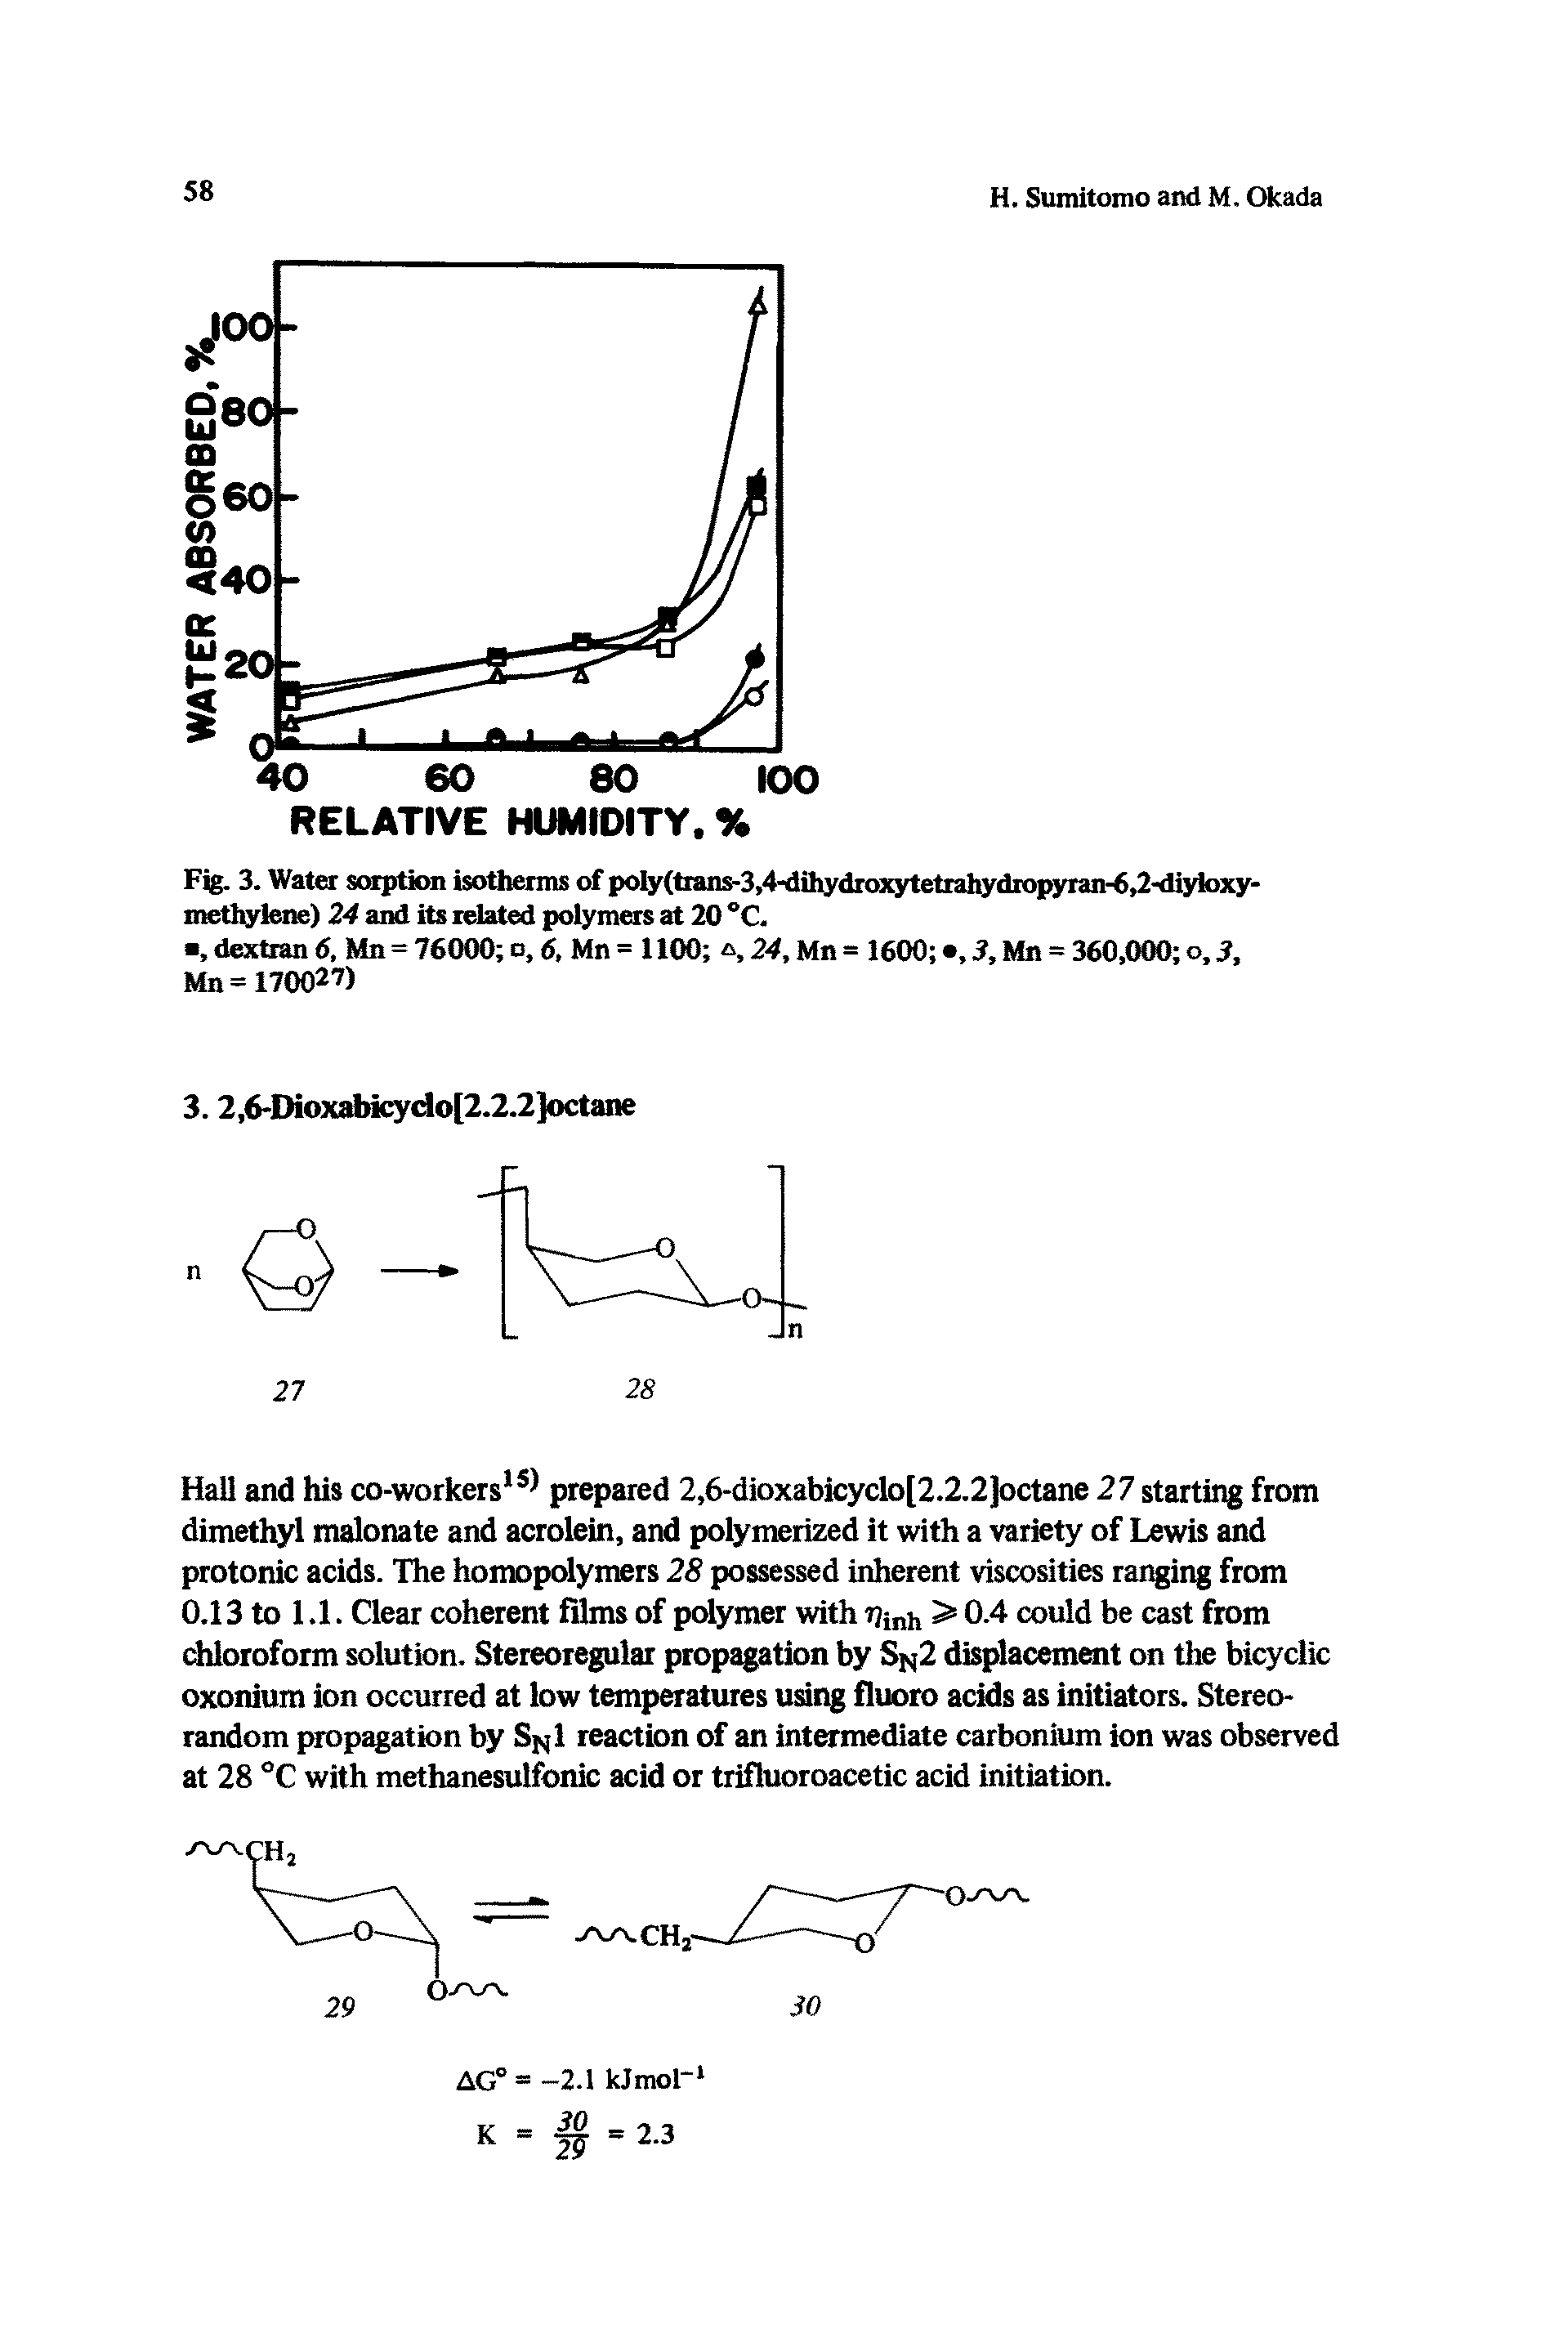 Fig. 3. Water sorption isotherms of poIy(trans-3,4-dihydroxytetrahydiopyran-6,2-diyloxy-methylene) 24 and its related polymers at 20 °C.